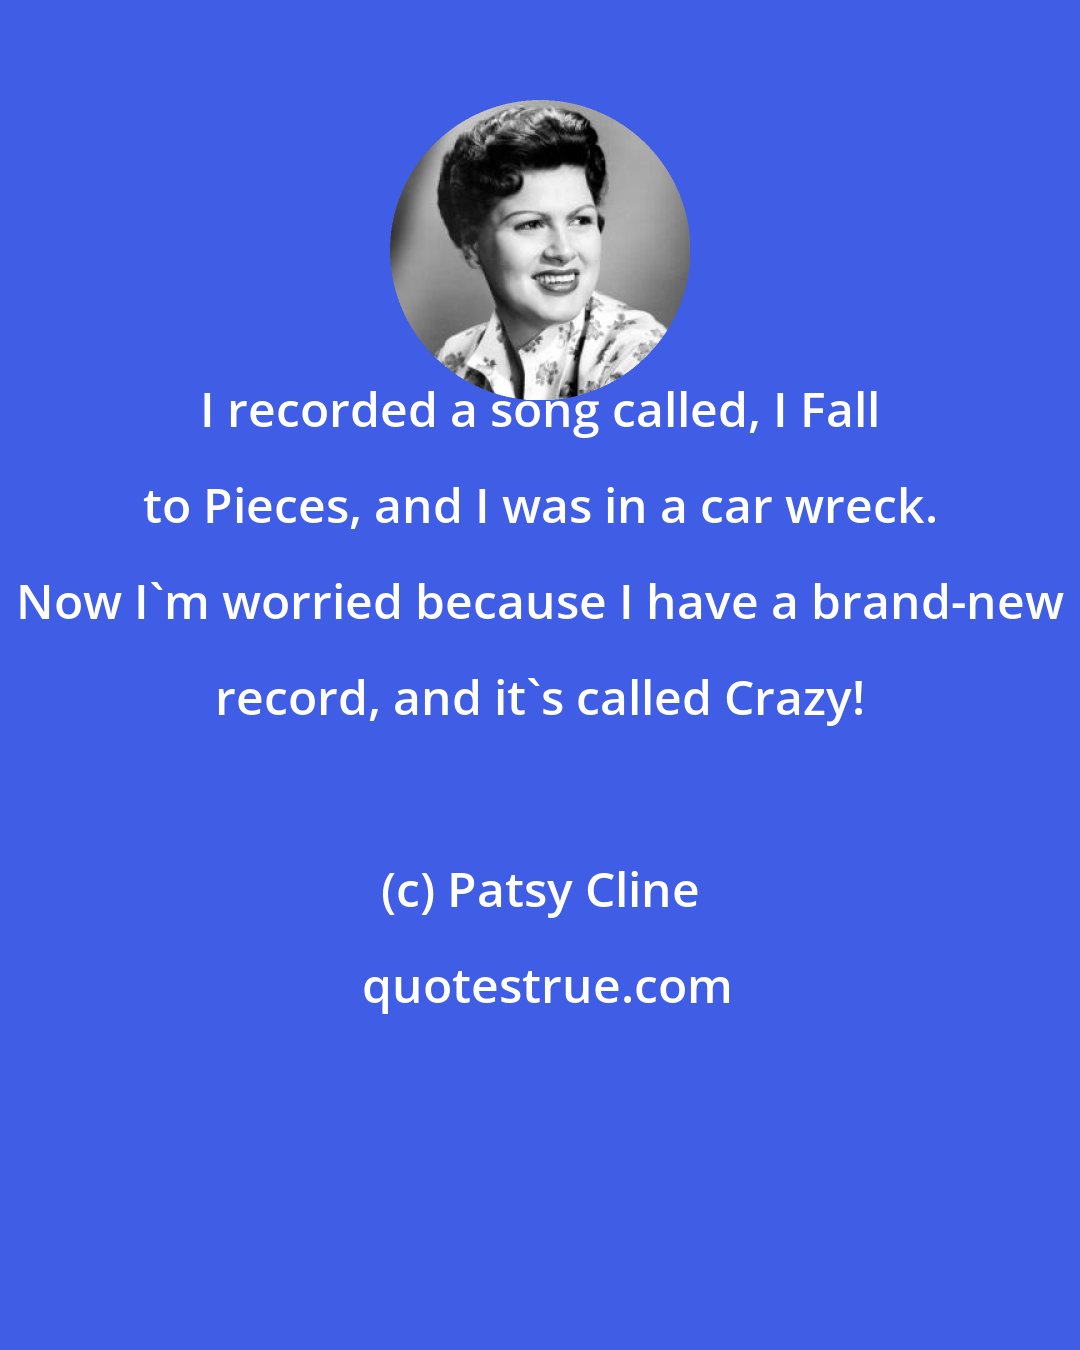 Patsy Cline: I recorded a song called, I Fall to Pieces, and I was in a car wreck. Now I'm worried because I have a brand-new record, and it's called Crazy!